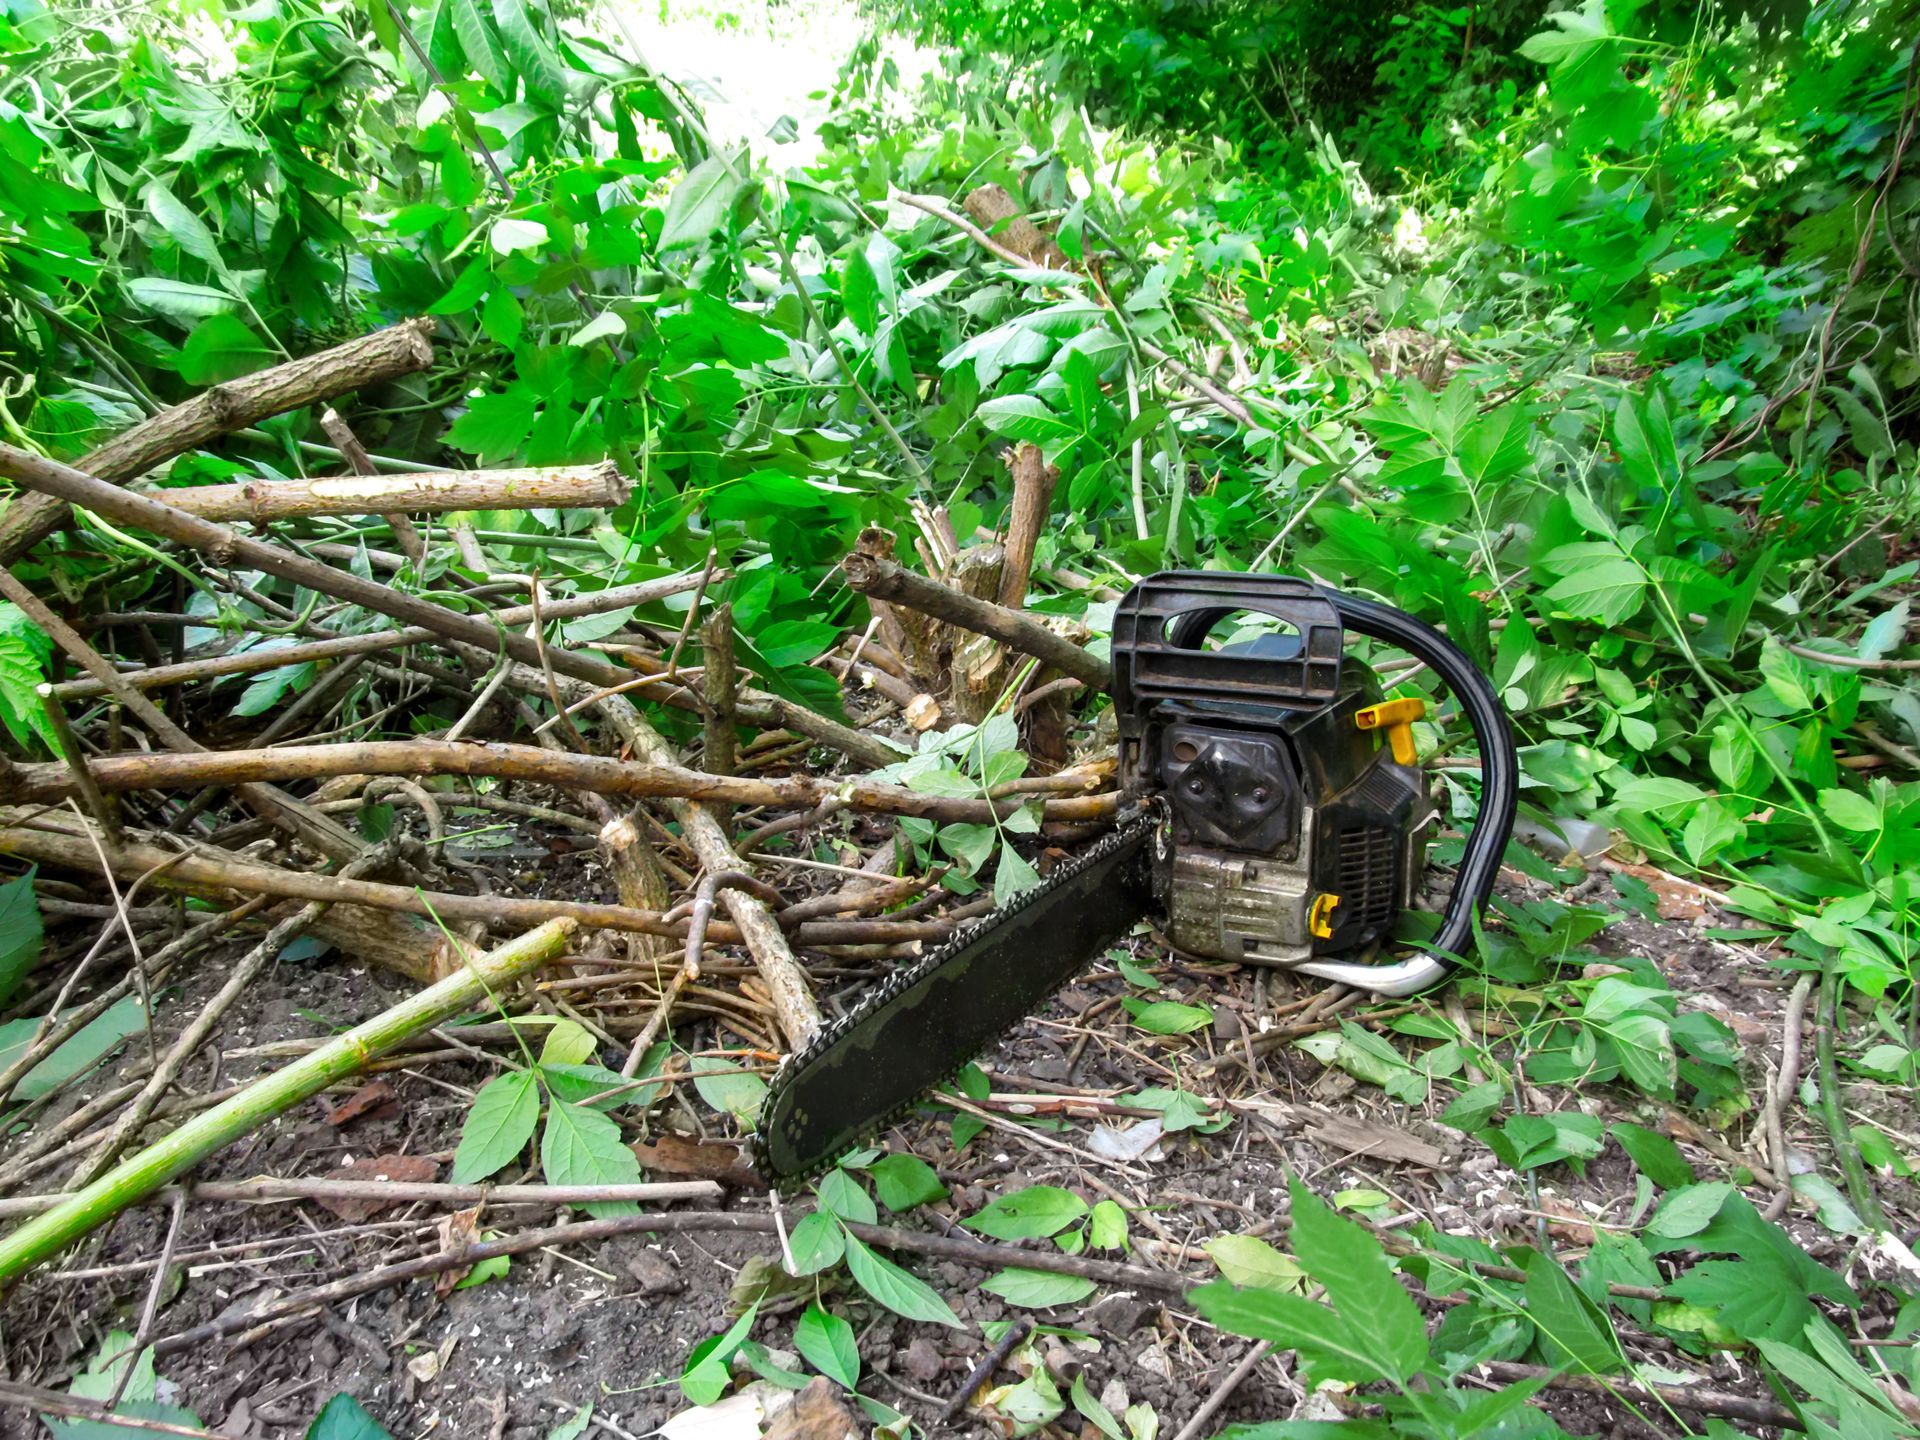 A chainsaw resting on the ground surrounded by trimmed branches from a bush, with lush green foliage in the background.